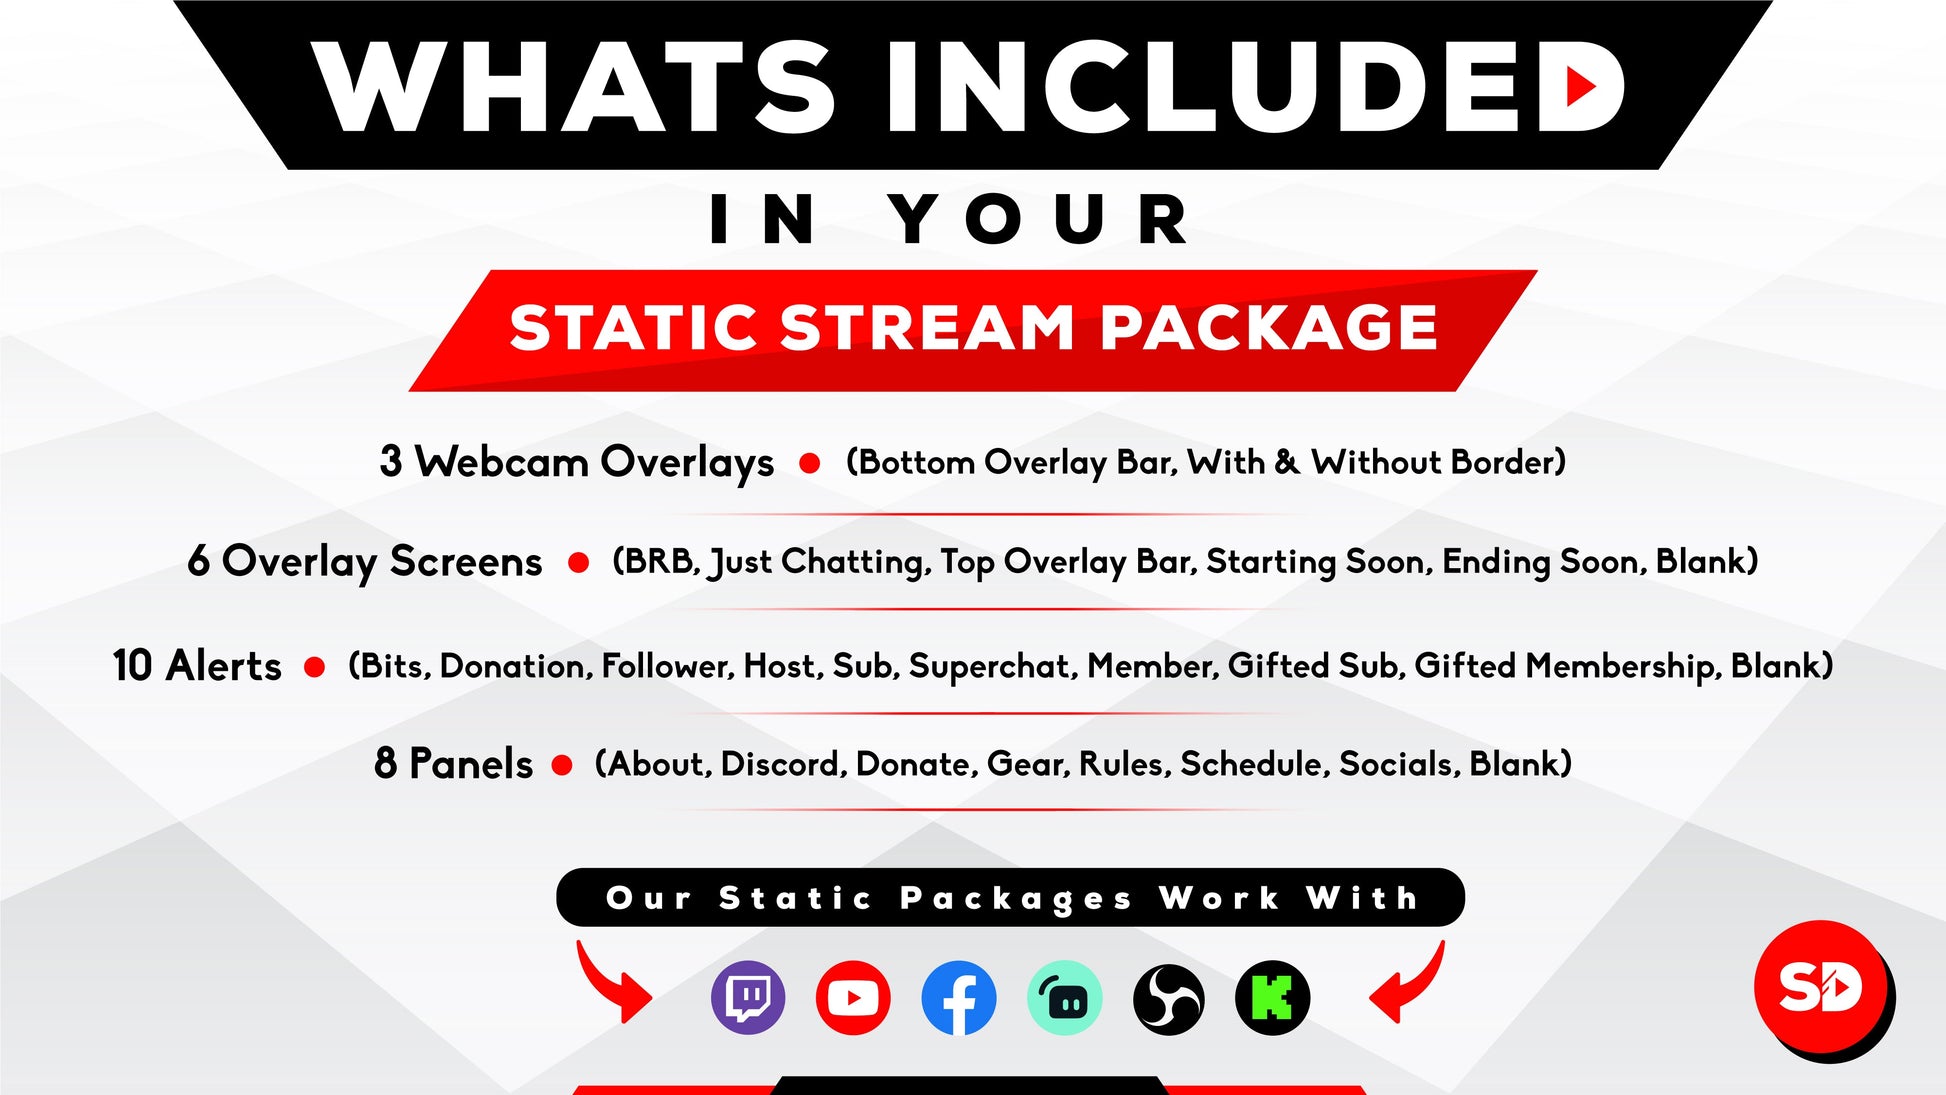 whats included in your static stream package - battleground - stream designz